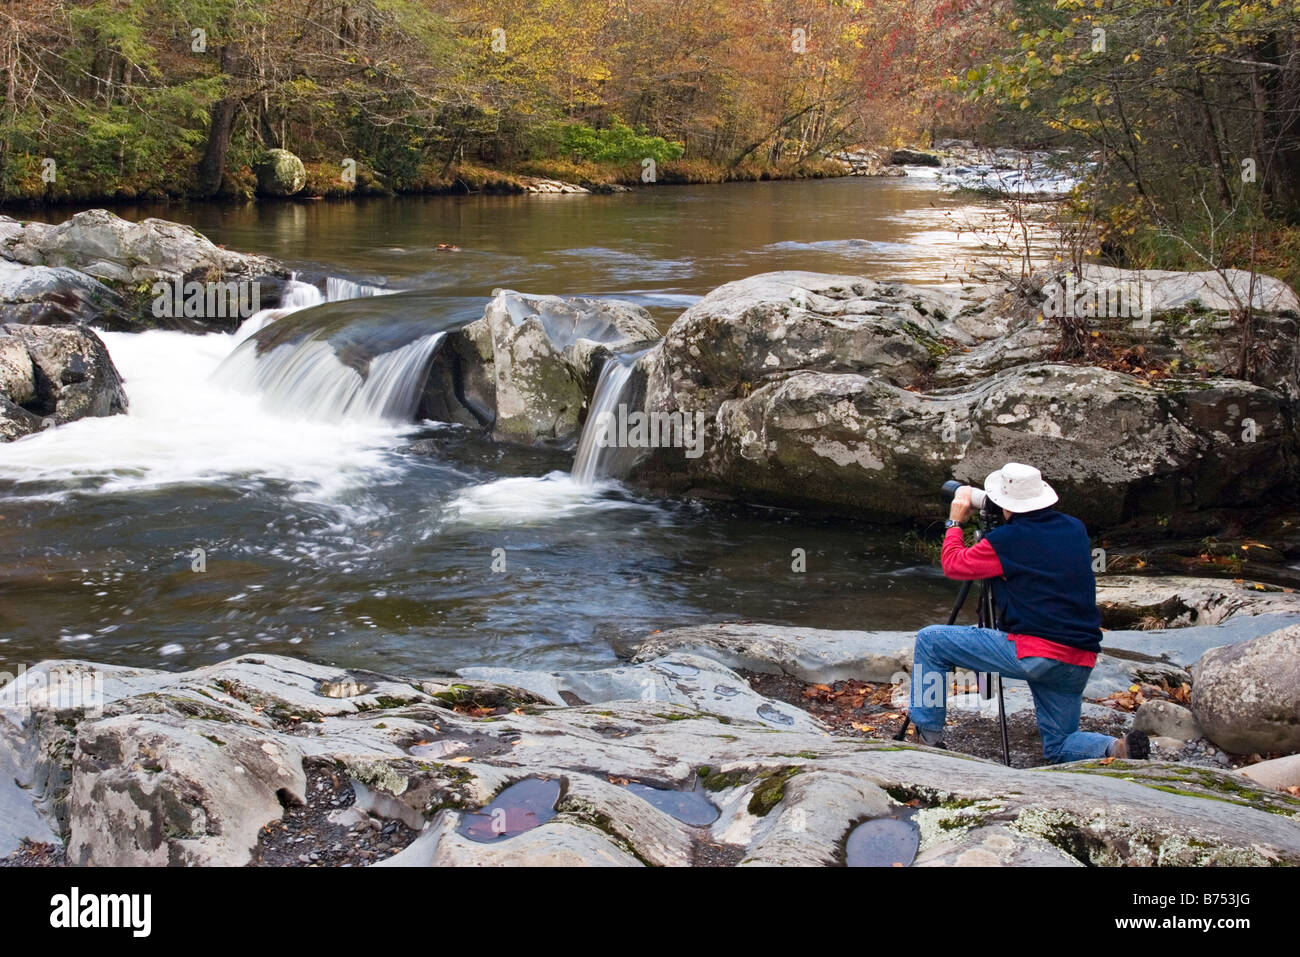 Photographer on the Little Pigeon River in the Smoky Mountains Stock Photo